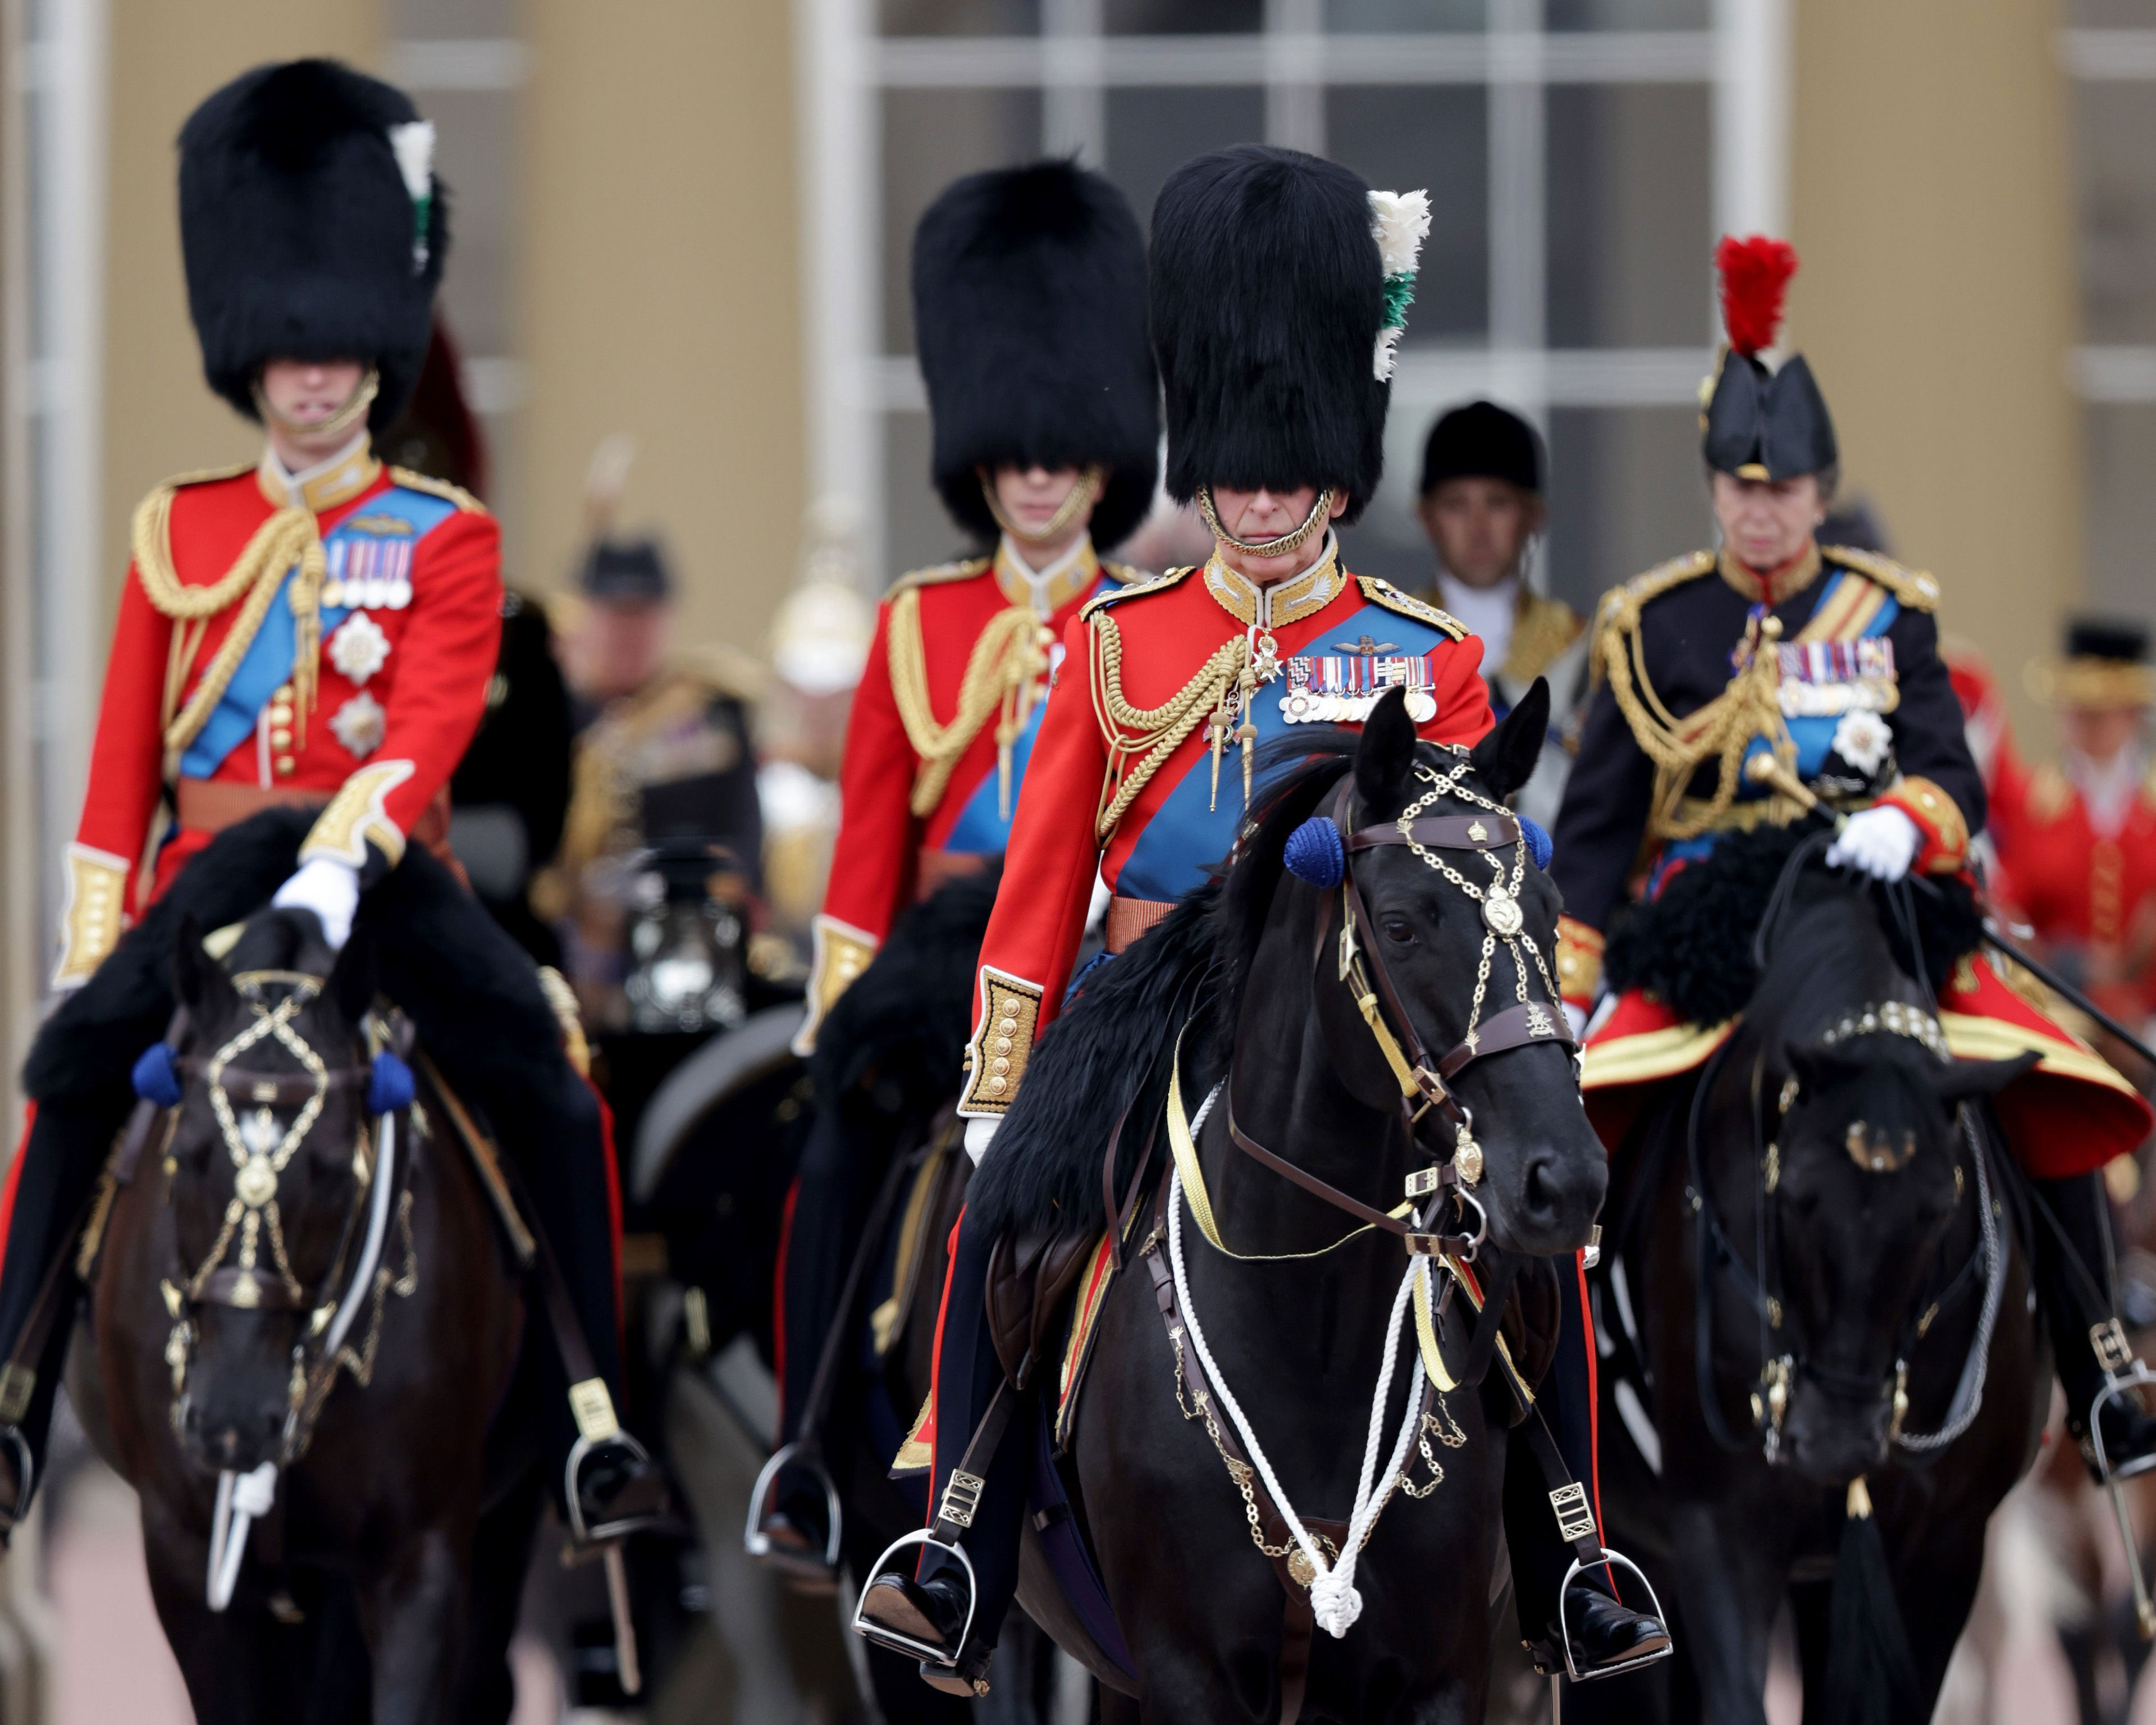 <p>Prince William, Prince Edward and Princess Anne followed behind King Charles III as they left Buckingham Palace on horseback during <a href="https://www.wonderwall.com/celebrity/royals/trooping-the-colour-2023-king-charles-iii-celebrates-the-first-of-his-reign-752078.gallery">Trooping the Colour</a> on June 17, 2023.</p>